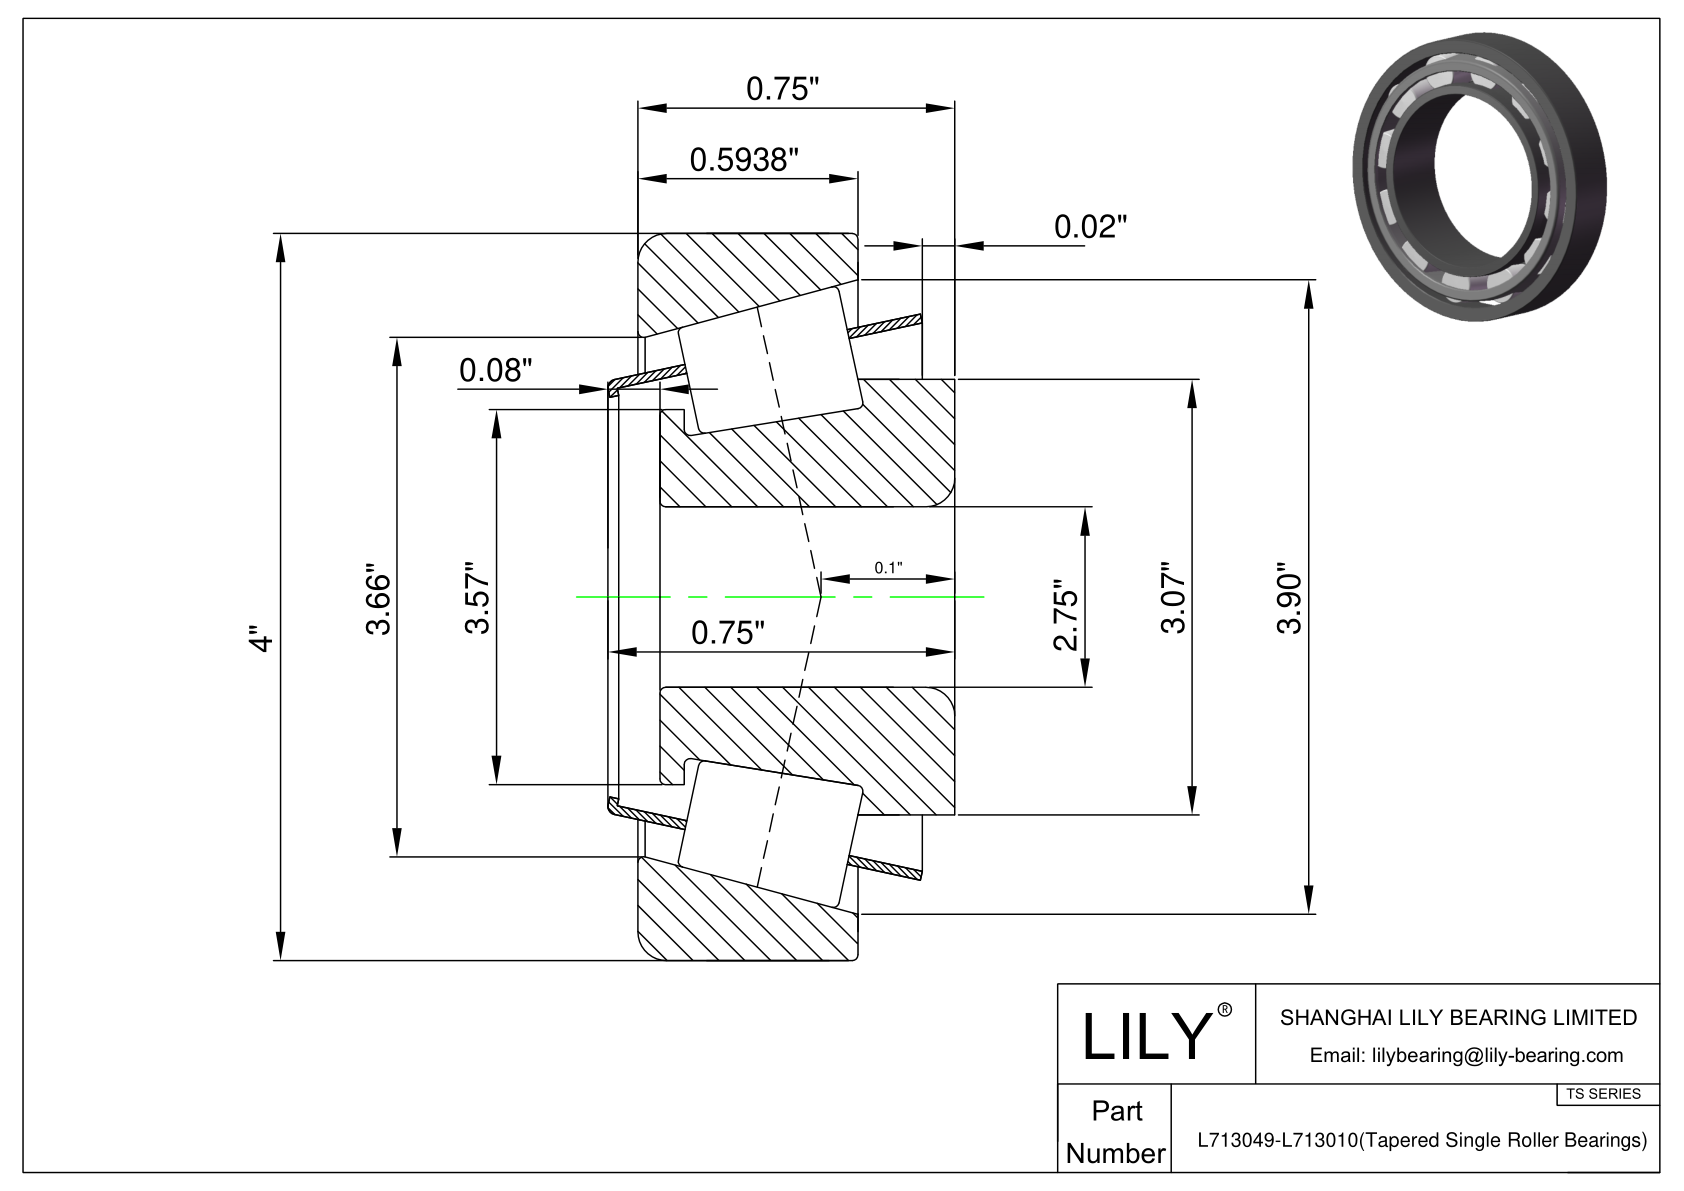 L713049-L713010 TS (Tapered Single Roller Bearings) (Imperial) cad drawing